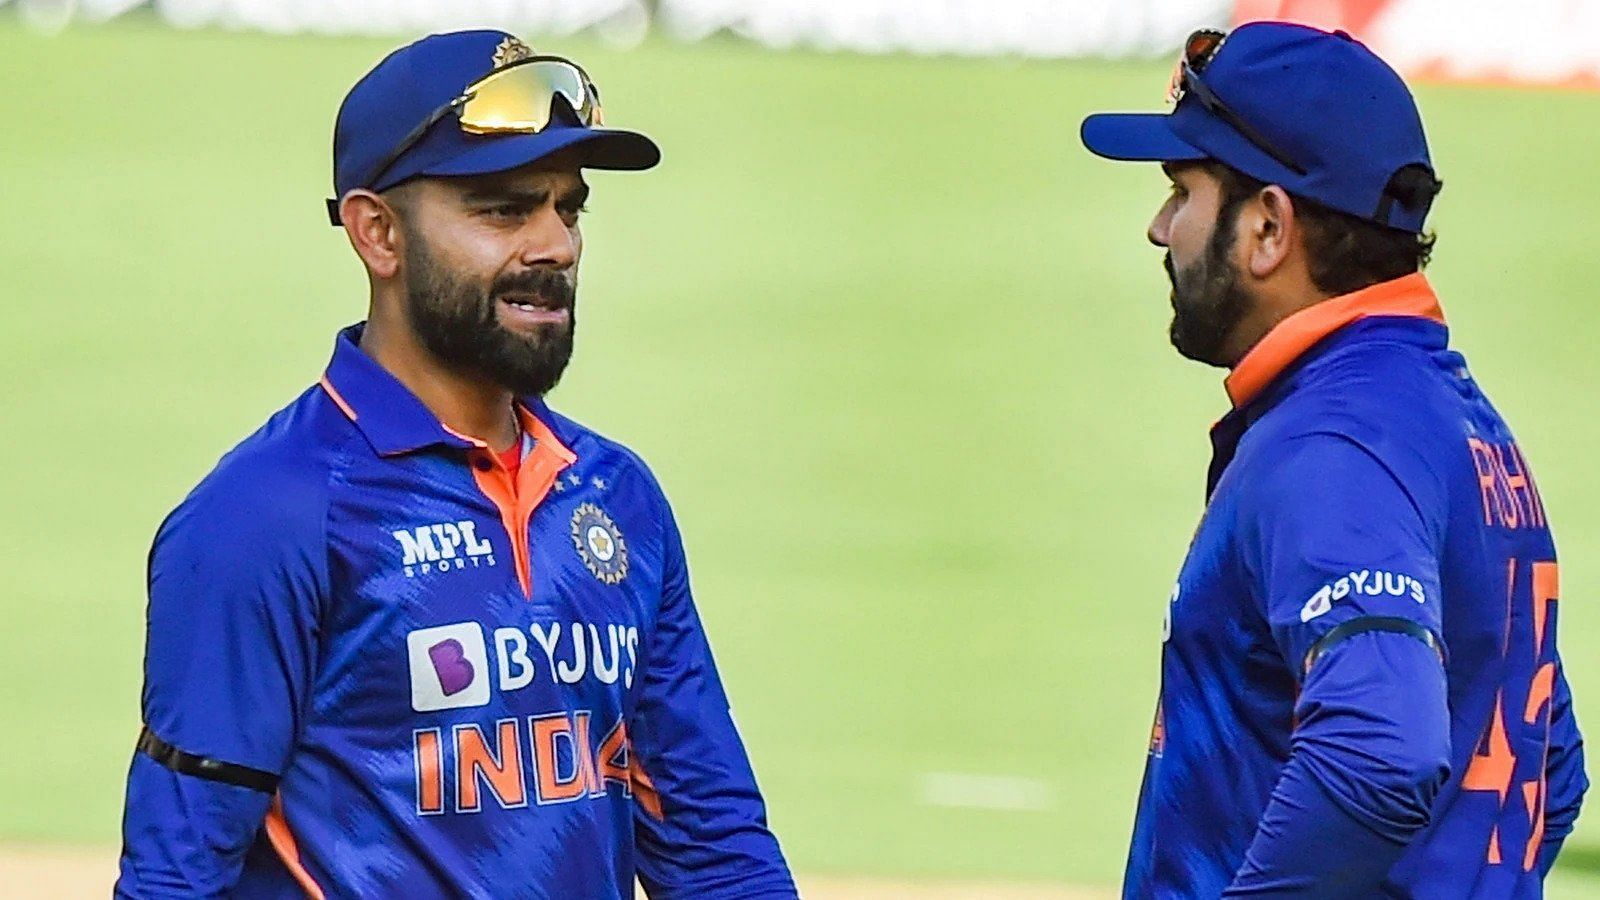 It is yet to be seen if this will be the last IPL or the last World Cup for  them" - Shoaib Akhtar expects pressure on Rohit Sharma and Virat Kohli